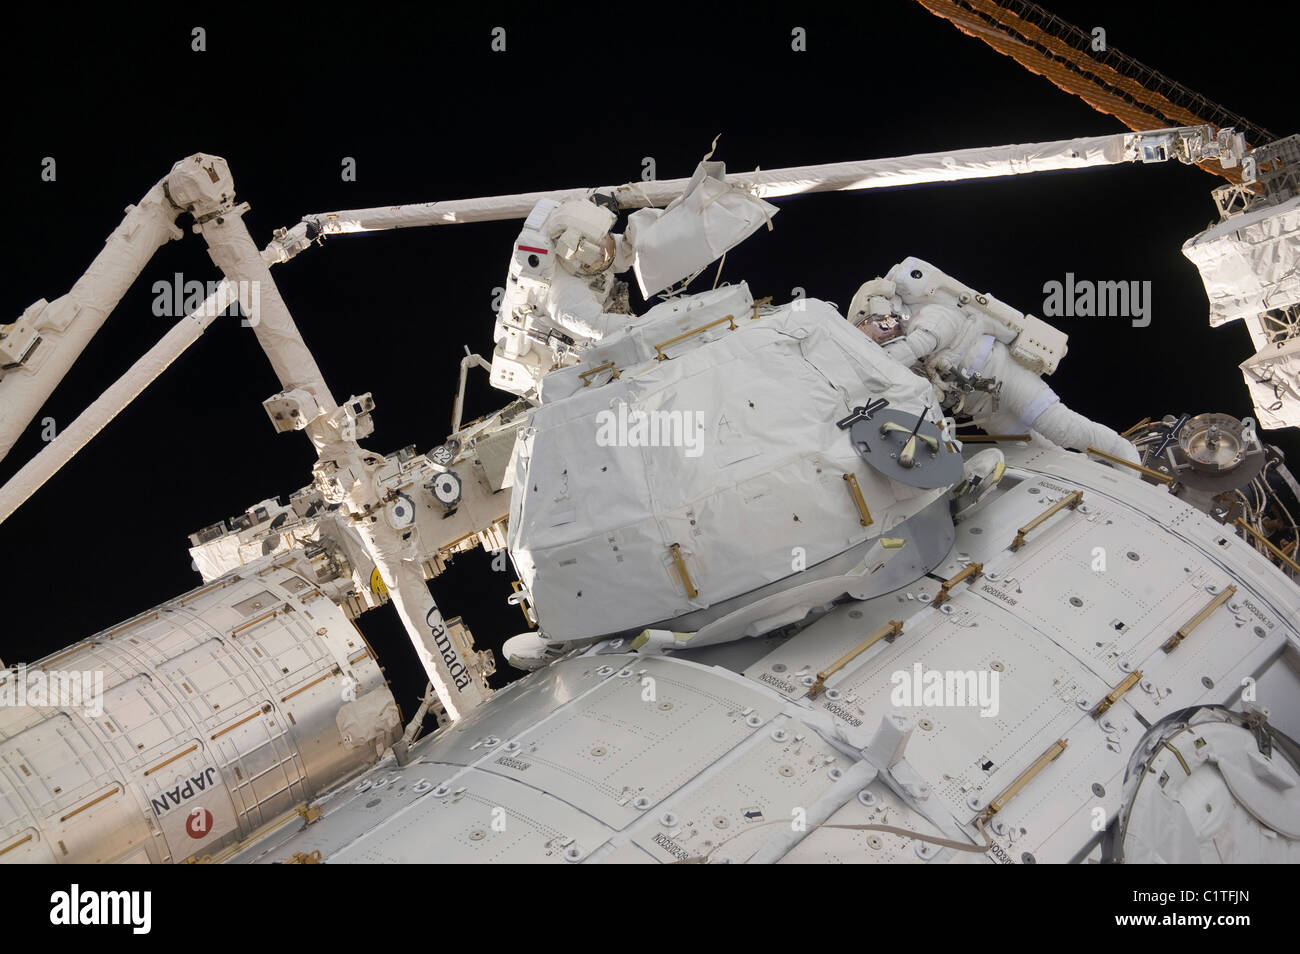 Astronauts participate in a session of extravehicular activity. Stock Photo